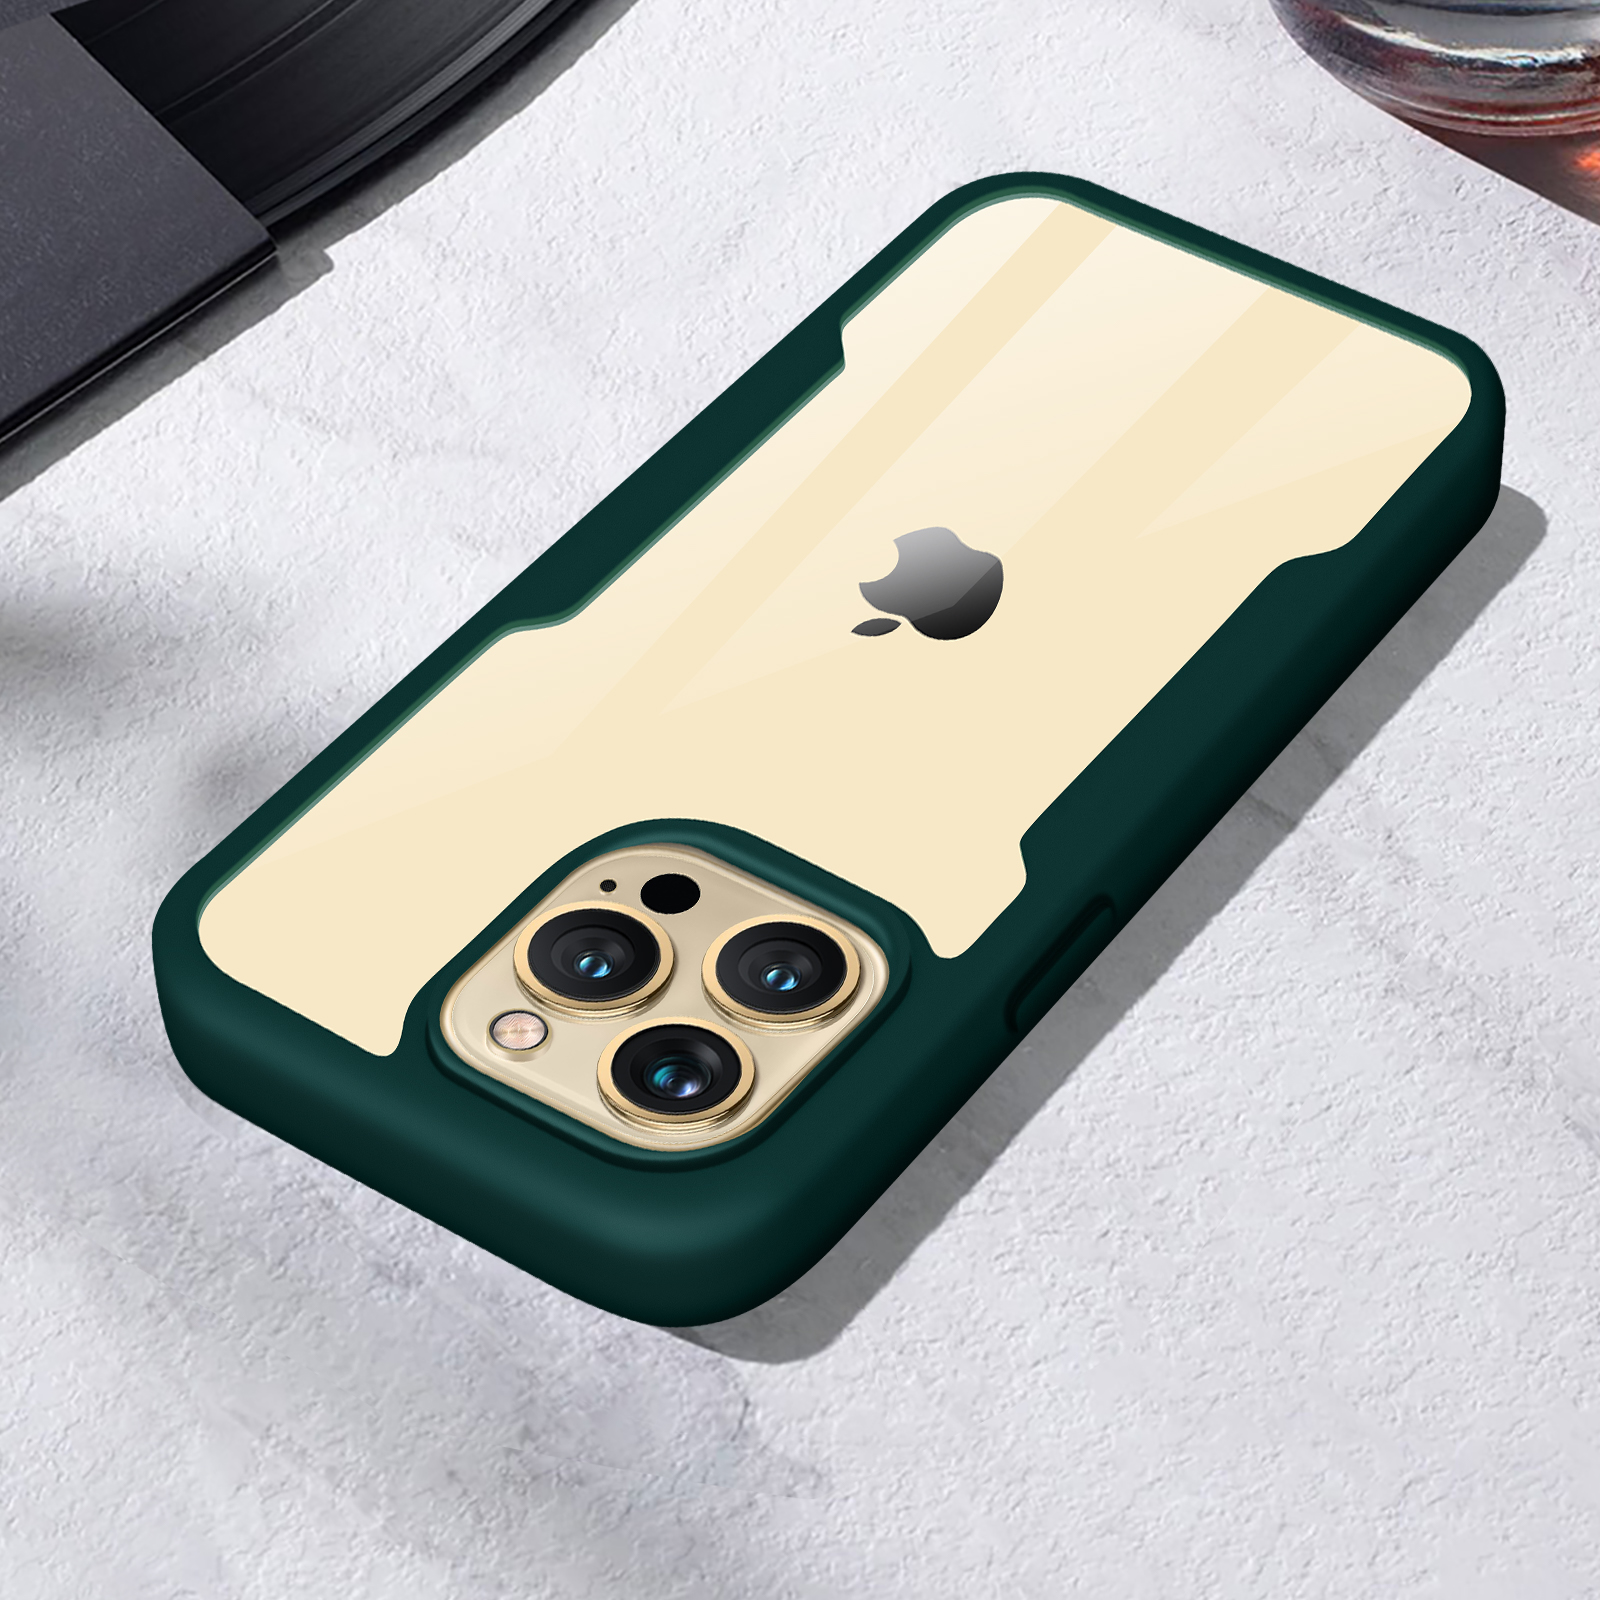 Coque Pour iPhone 13 Pro Max (6,7) Turquoise Antichoc Luxe TPU Souple  Anti-Rayure Galvanisé Or